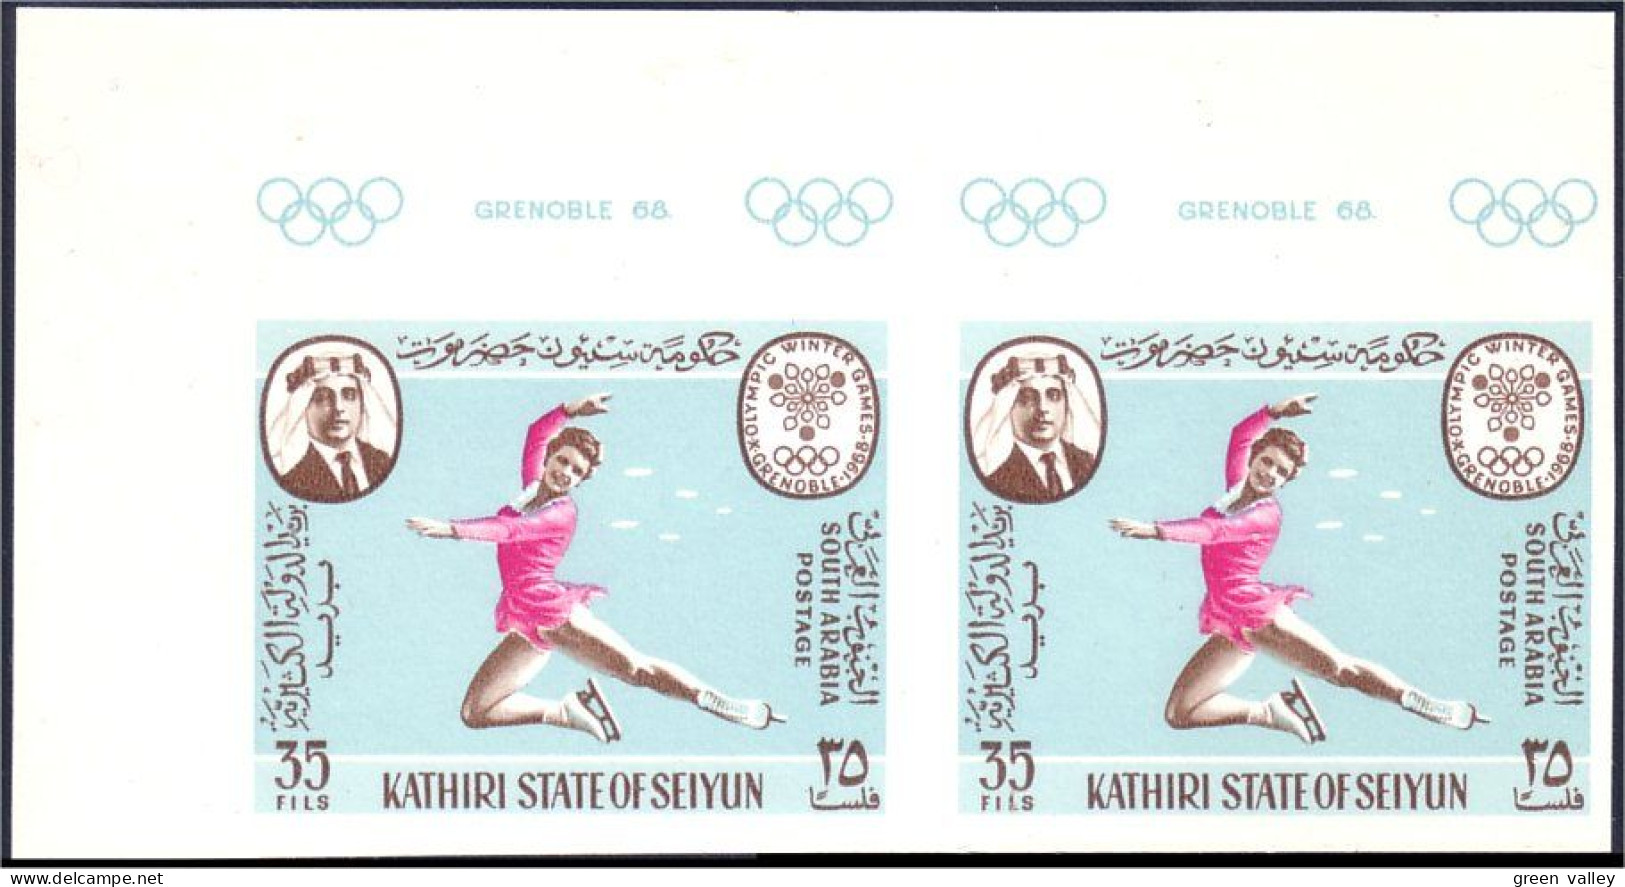 Aden Grenoble 68 Patinage Artistique Figure Skating Paire Non Dentelée Imperforate Pair MNH ** Neuf SC ( A53 378) - Invierno 1968: Grenoble